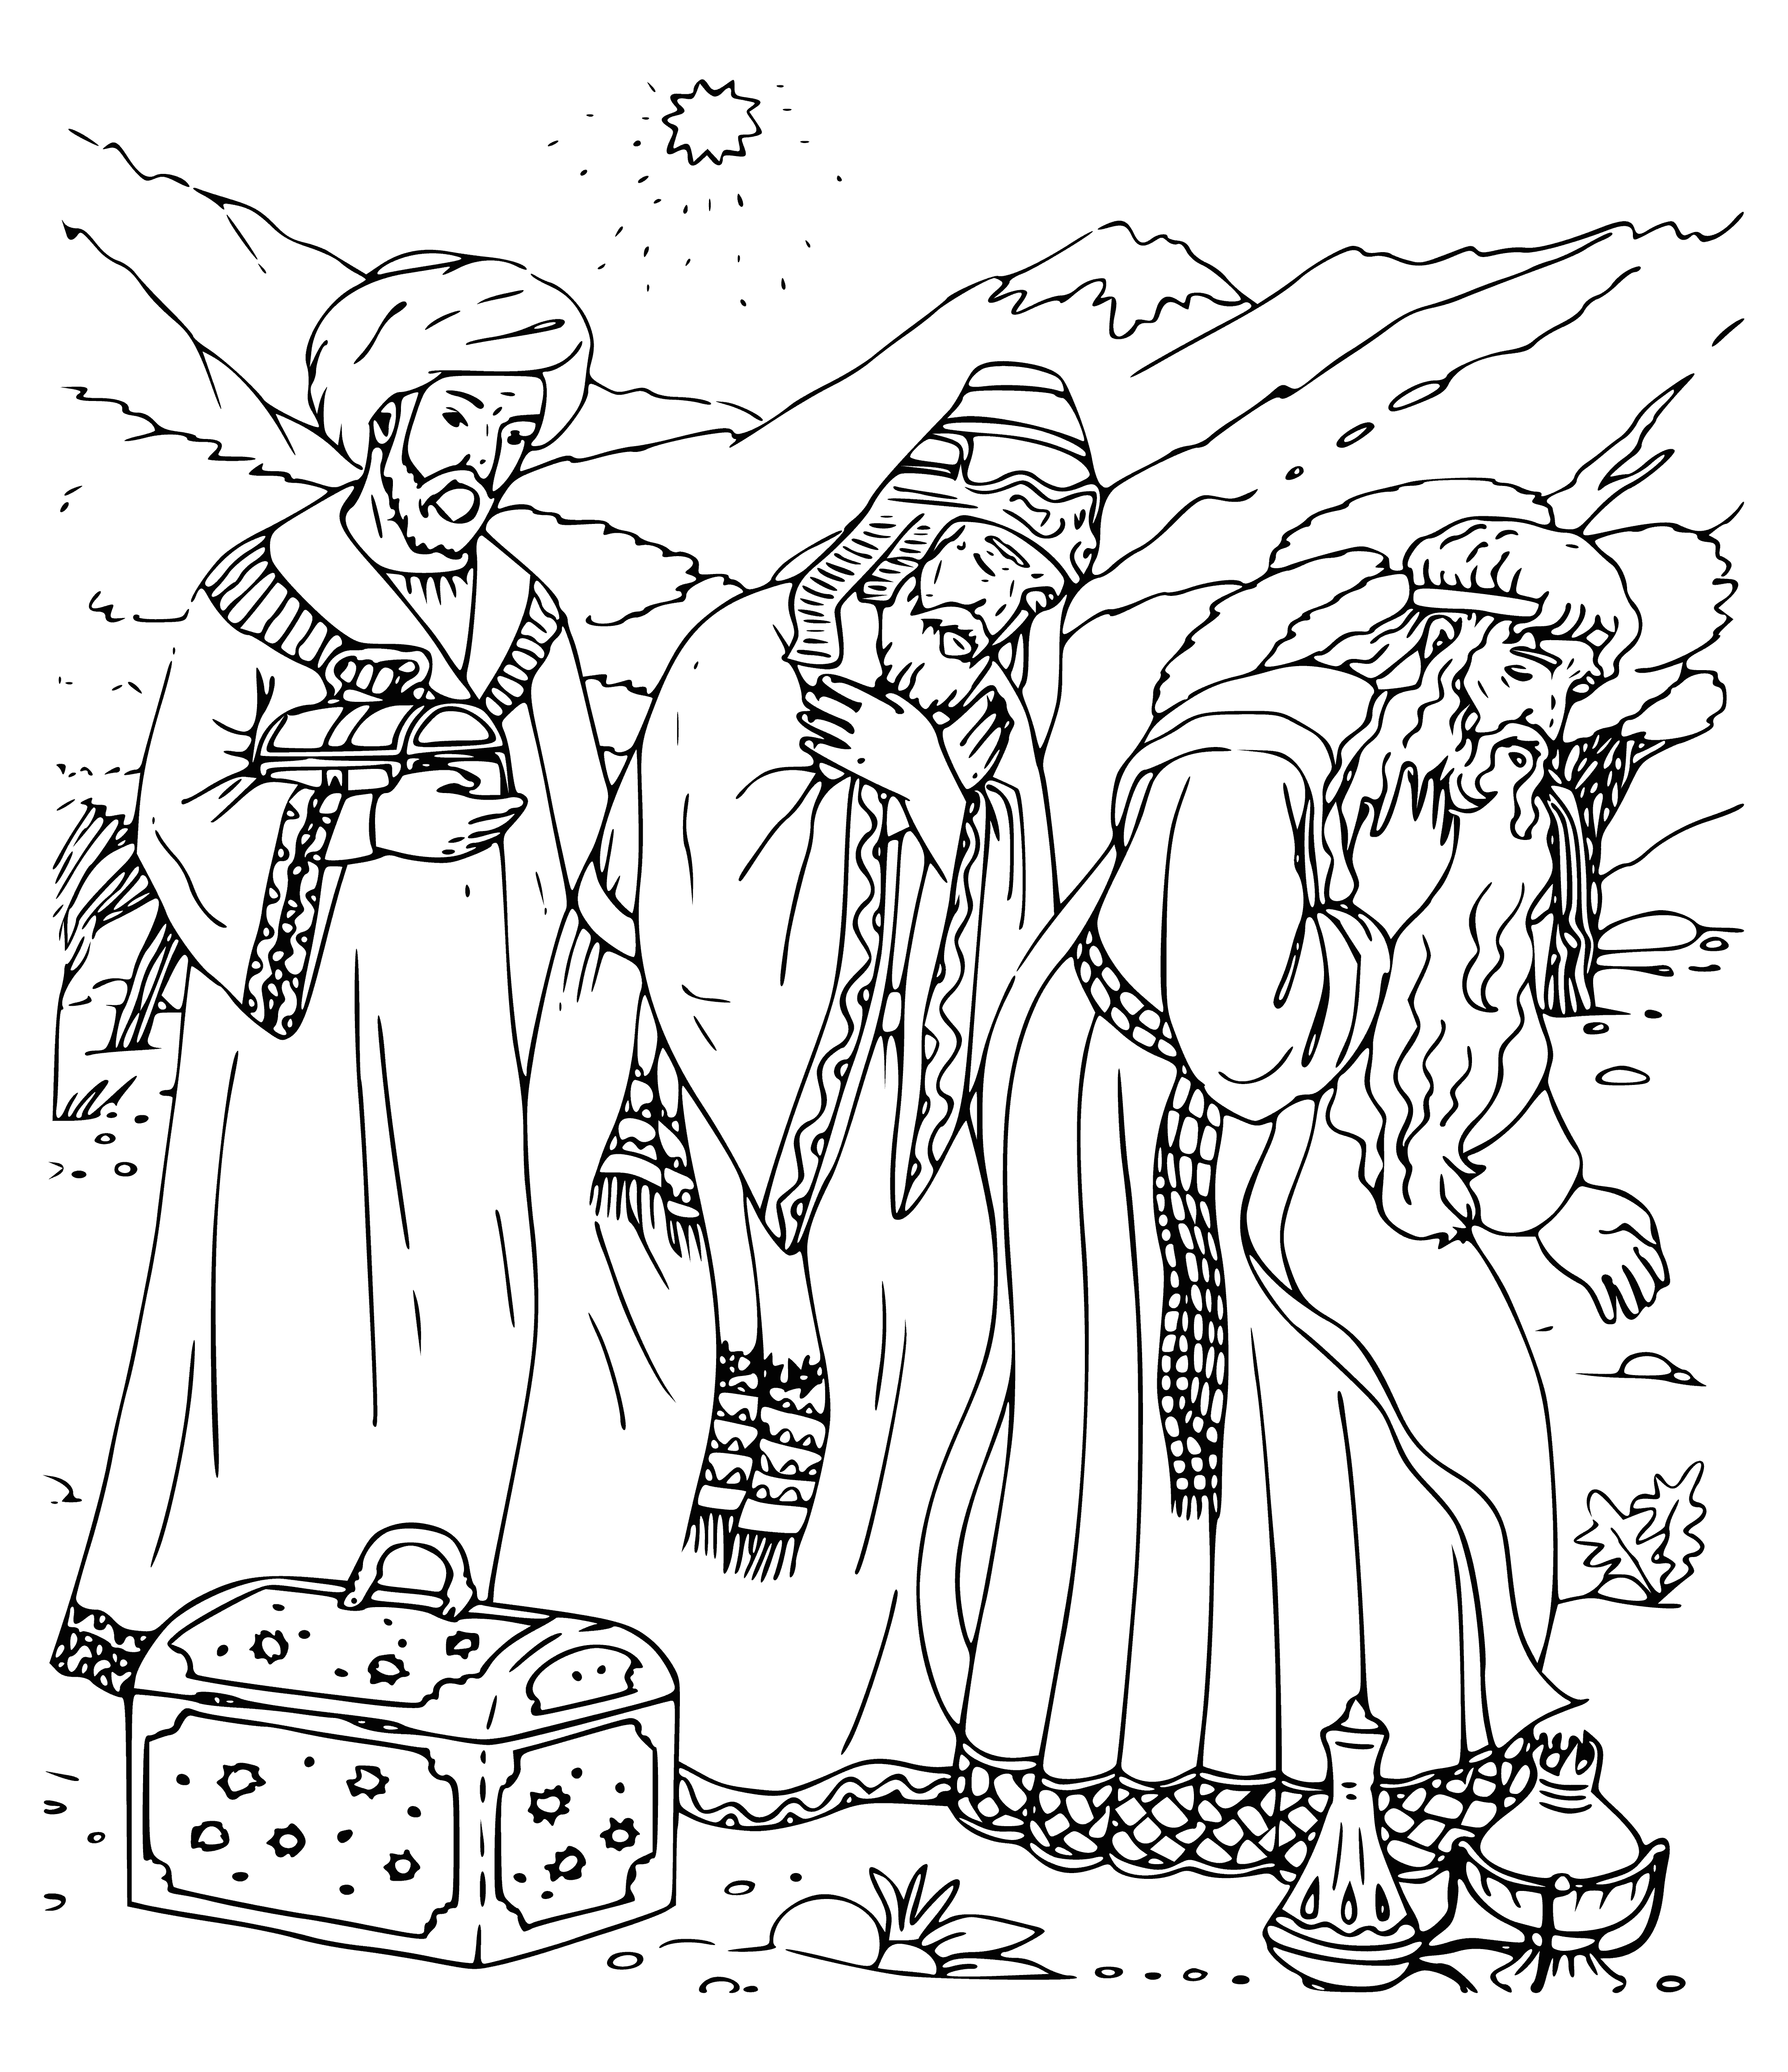 coloring page: 3 magi in robes & turbans worshiping at a stable, holding gifts & staff. A star shines in the sky above. #Epiphany